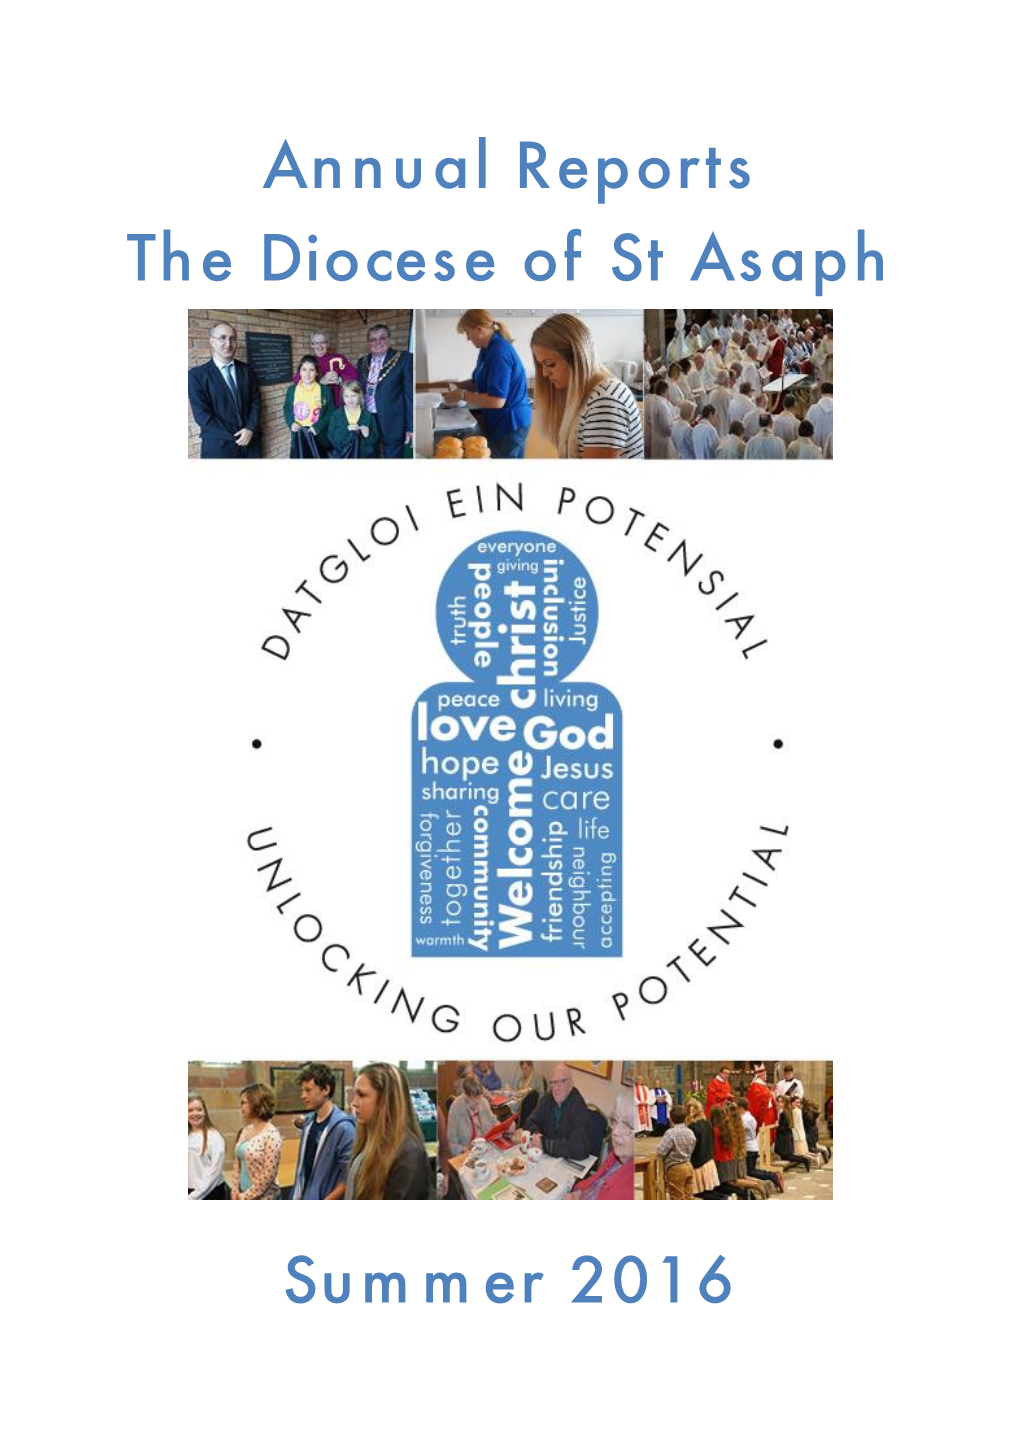 Annual Reports the Diocese of St Asaph Summer 2016